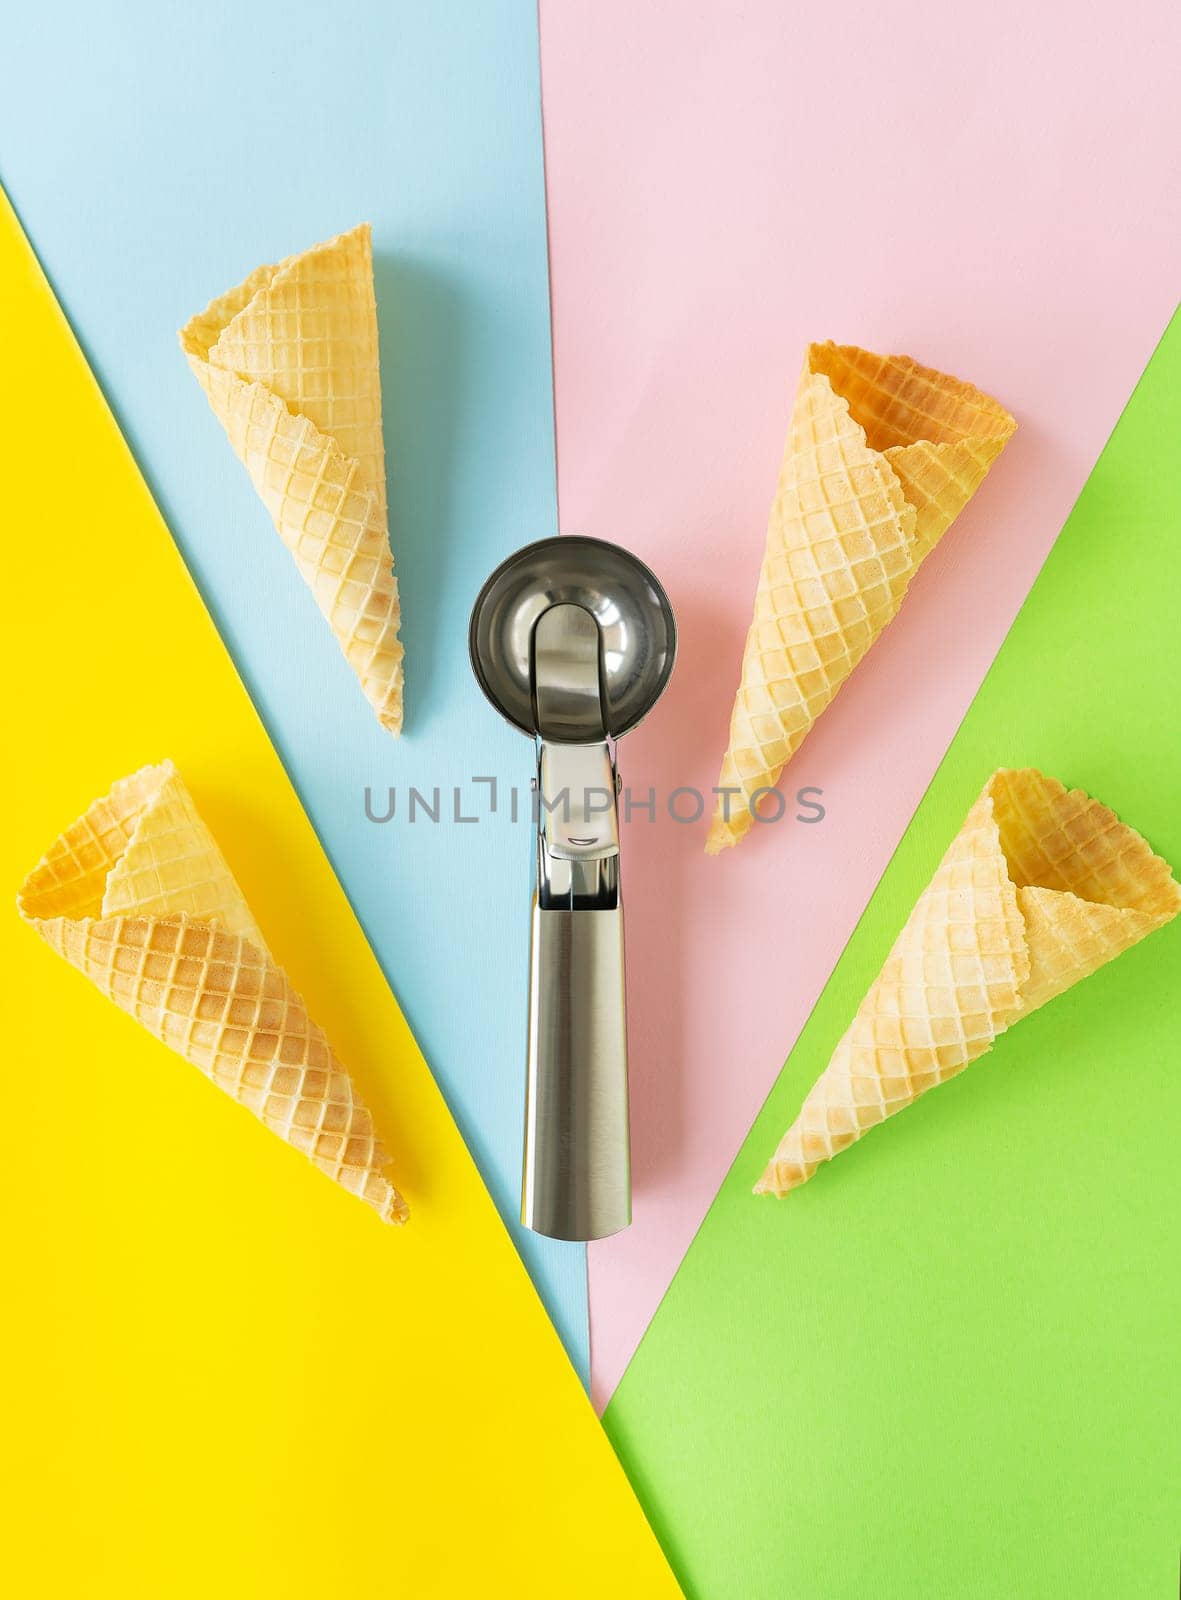 Wafer cups on a multi-colored bright background along with a metal spoon. Takeaway ice cream concept, vertical photo